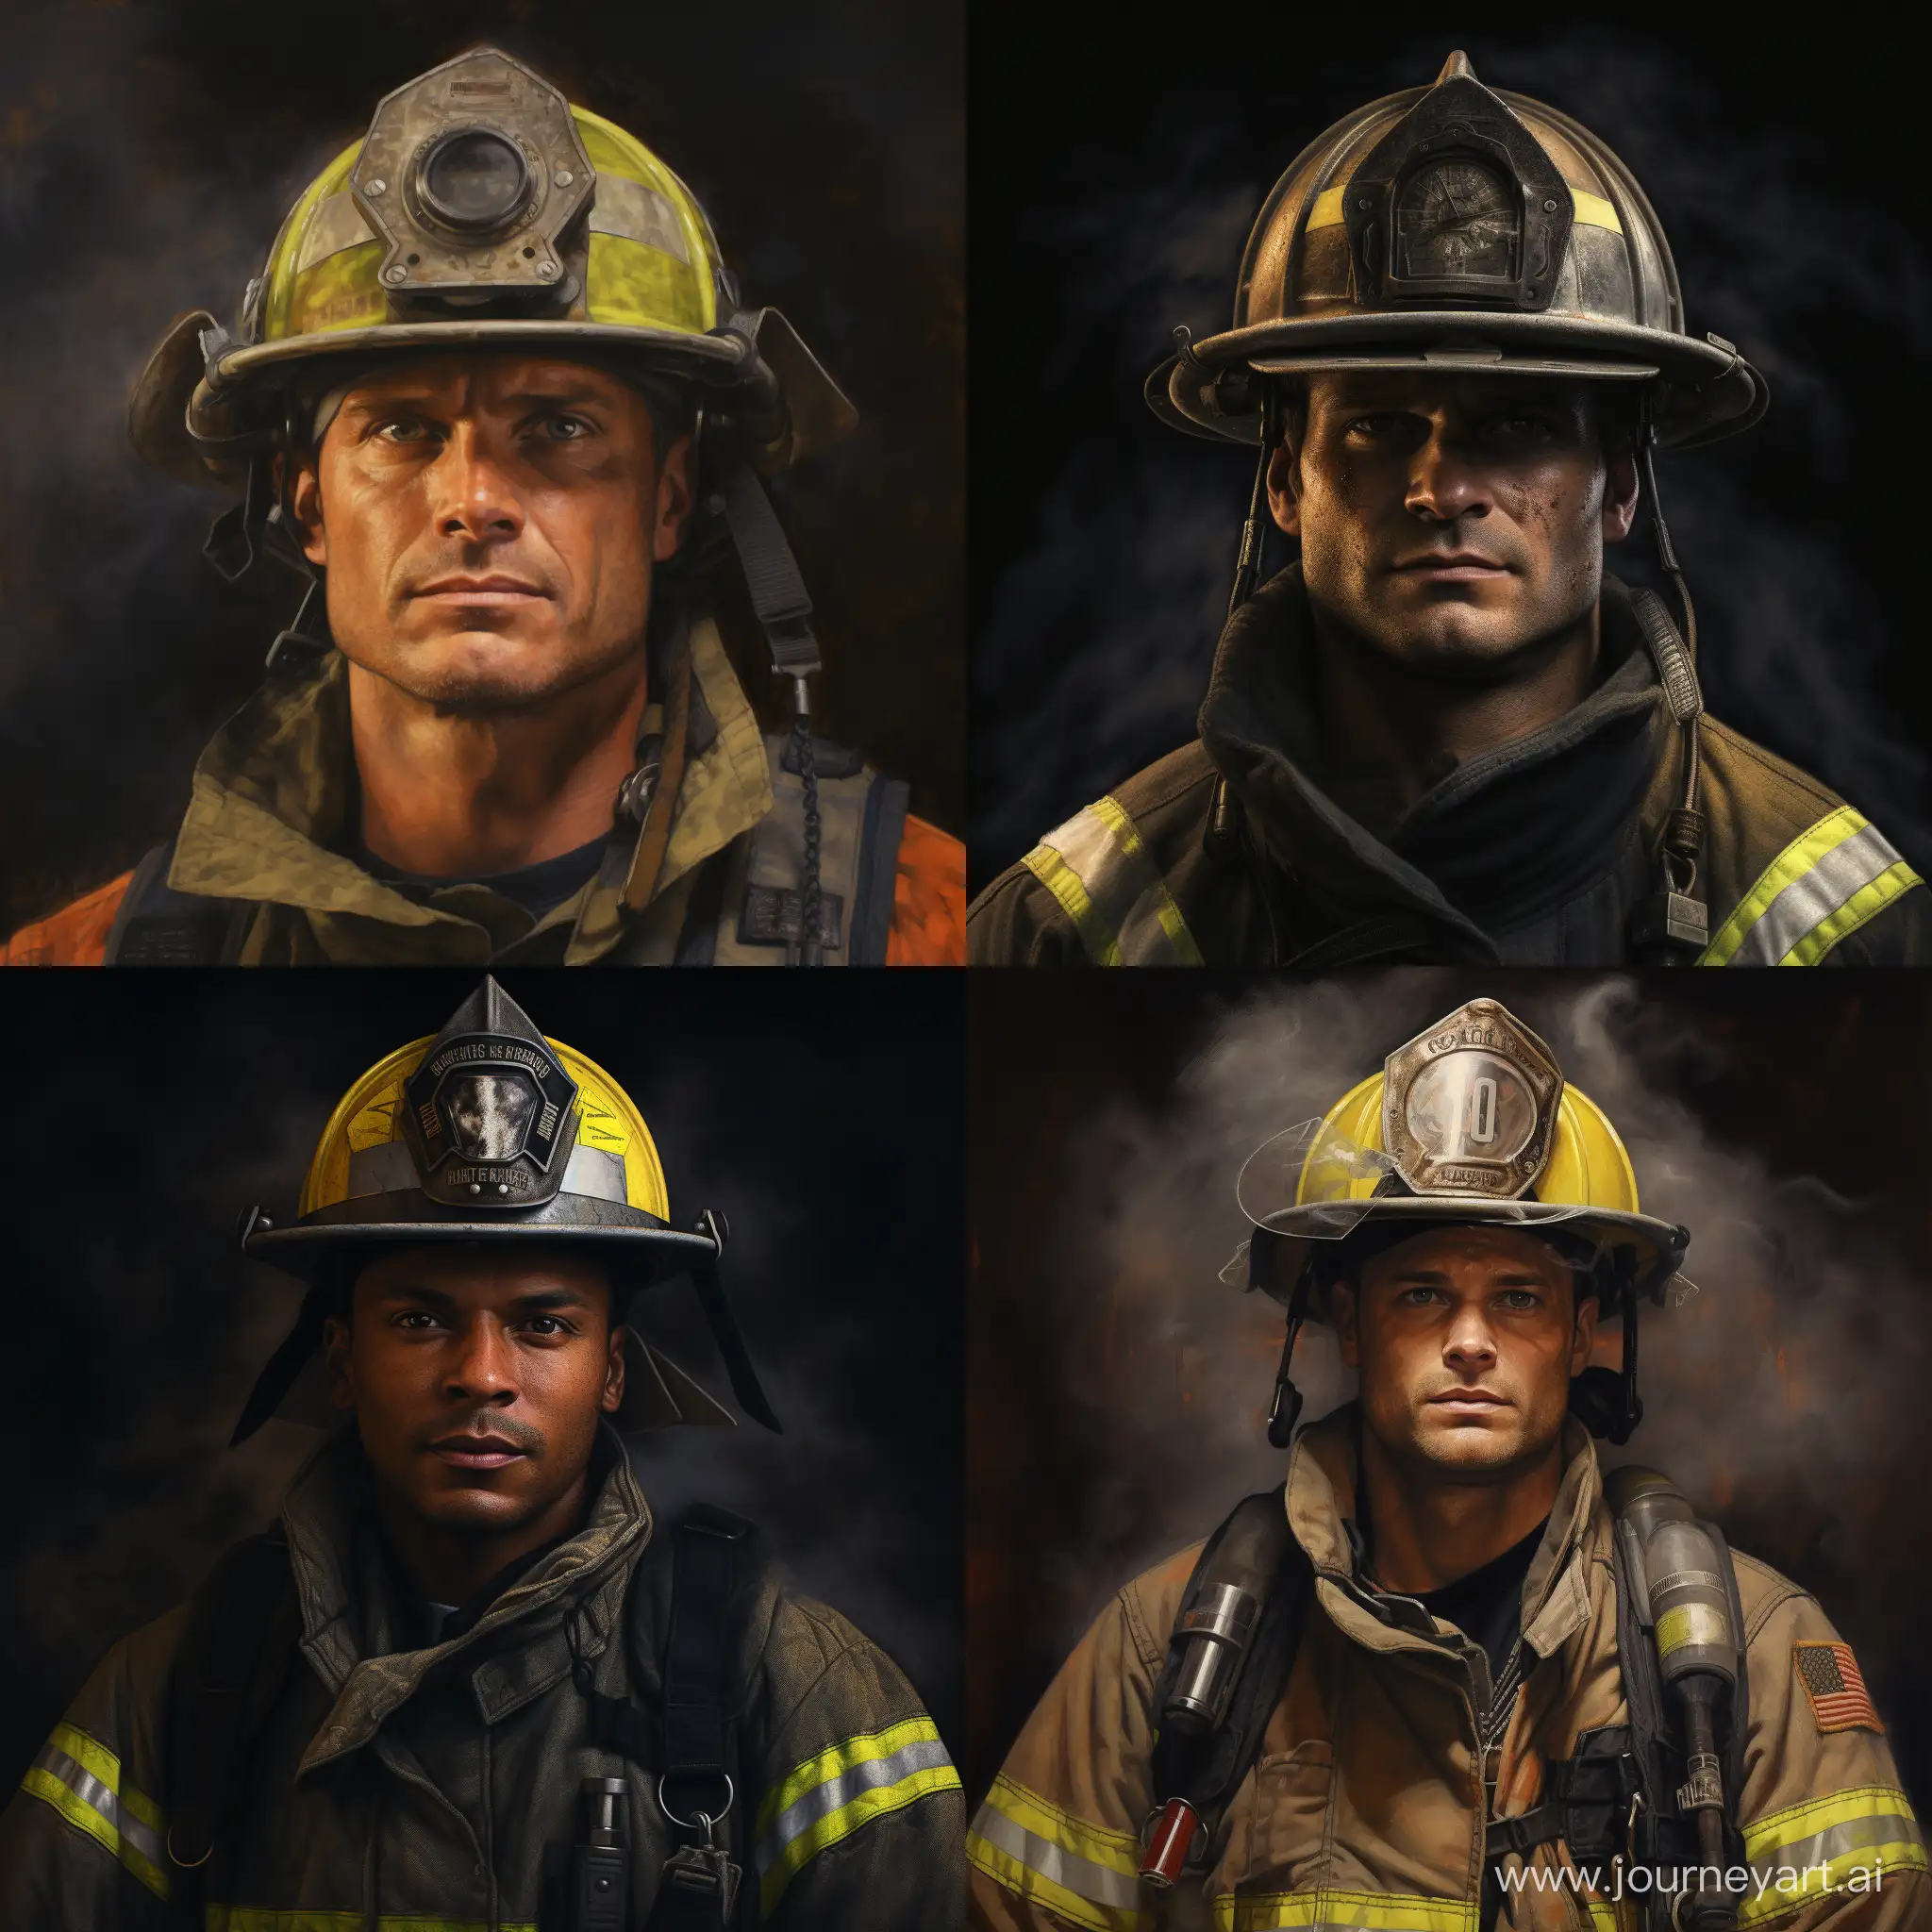 Dedicated-Firefighter-Poses-in-Striking-Portrait